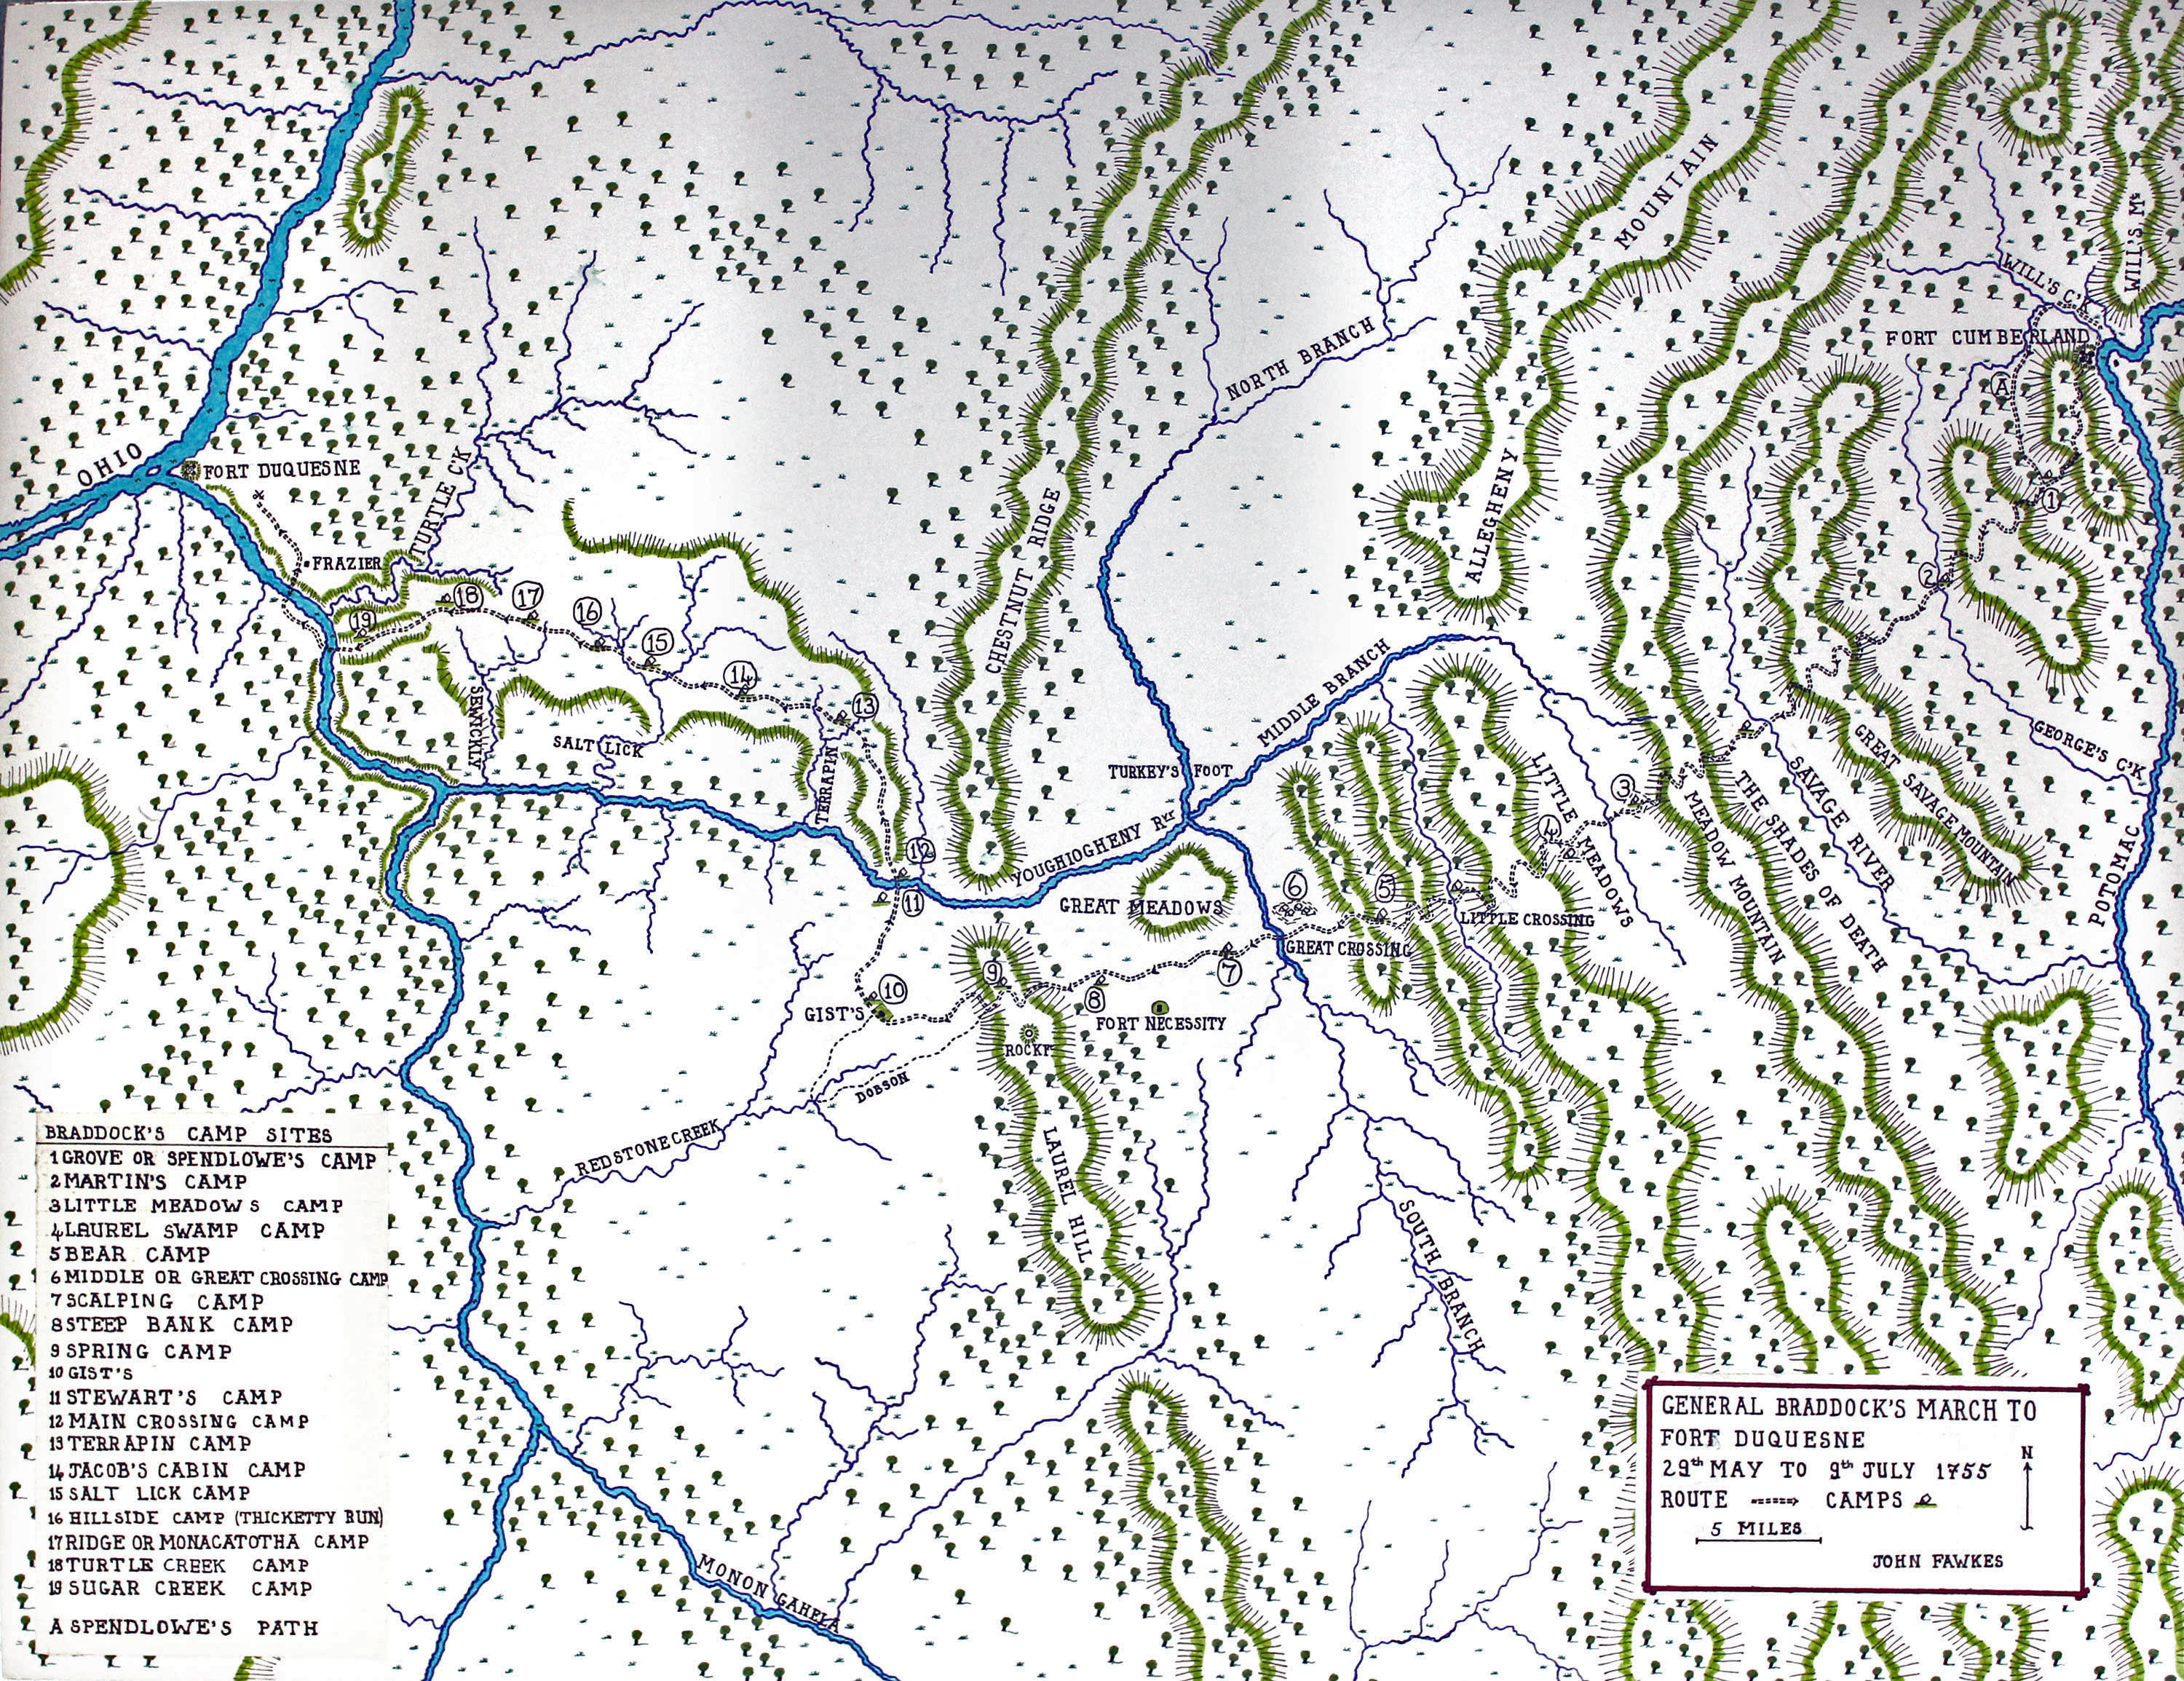 Map of General Braddock’s march from Fort Cumberland to Fort Duquesne on the Monongahela River, May to July 1755, showing A Spendlow’s Path and camps at 1 Grove 2 Martin’s 3 Little Meadows 4 Laurel 5 Bear 6 Great Crossing 7 Scalping 8 Steep Bank 9 Spring 10 Gist’s 11 Stewart’s 12 Main Crossing 13 Terrapin 14 Jacob’s 15 Salt Lick 16 Hillside 17 Ride 18 Turtle 19 Sugar: Map by John Fawkes